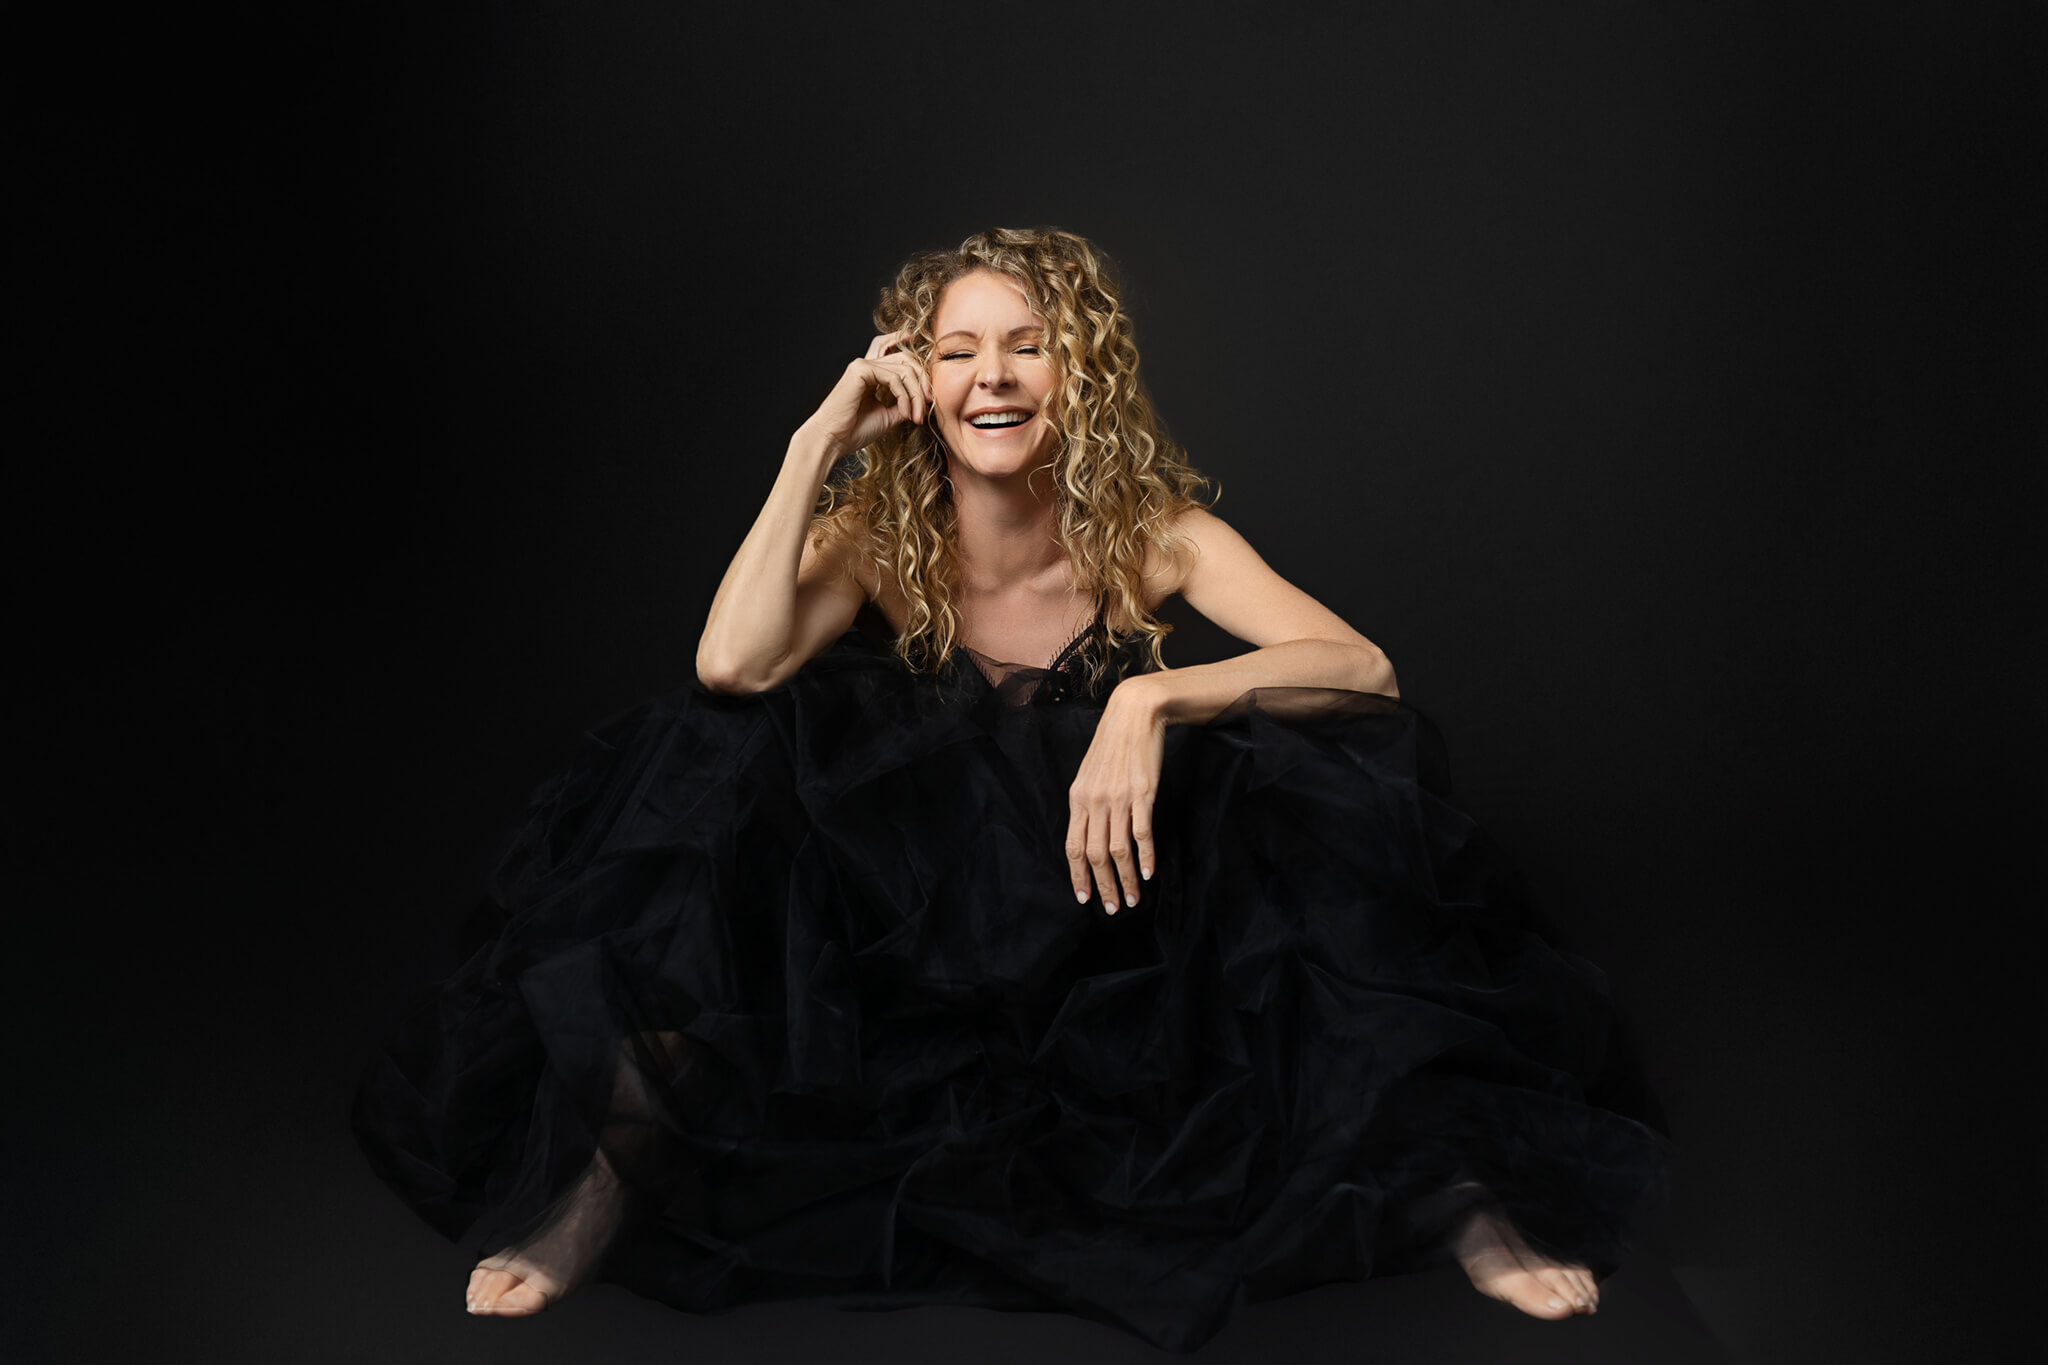 Blonde woman is laughing in a relaxed pose for her photoshoot with a black dress and black backdrop